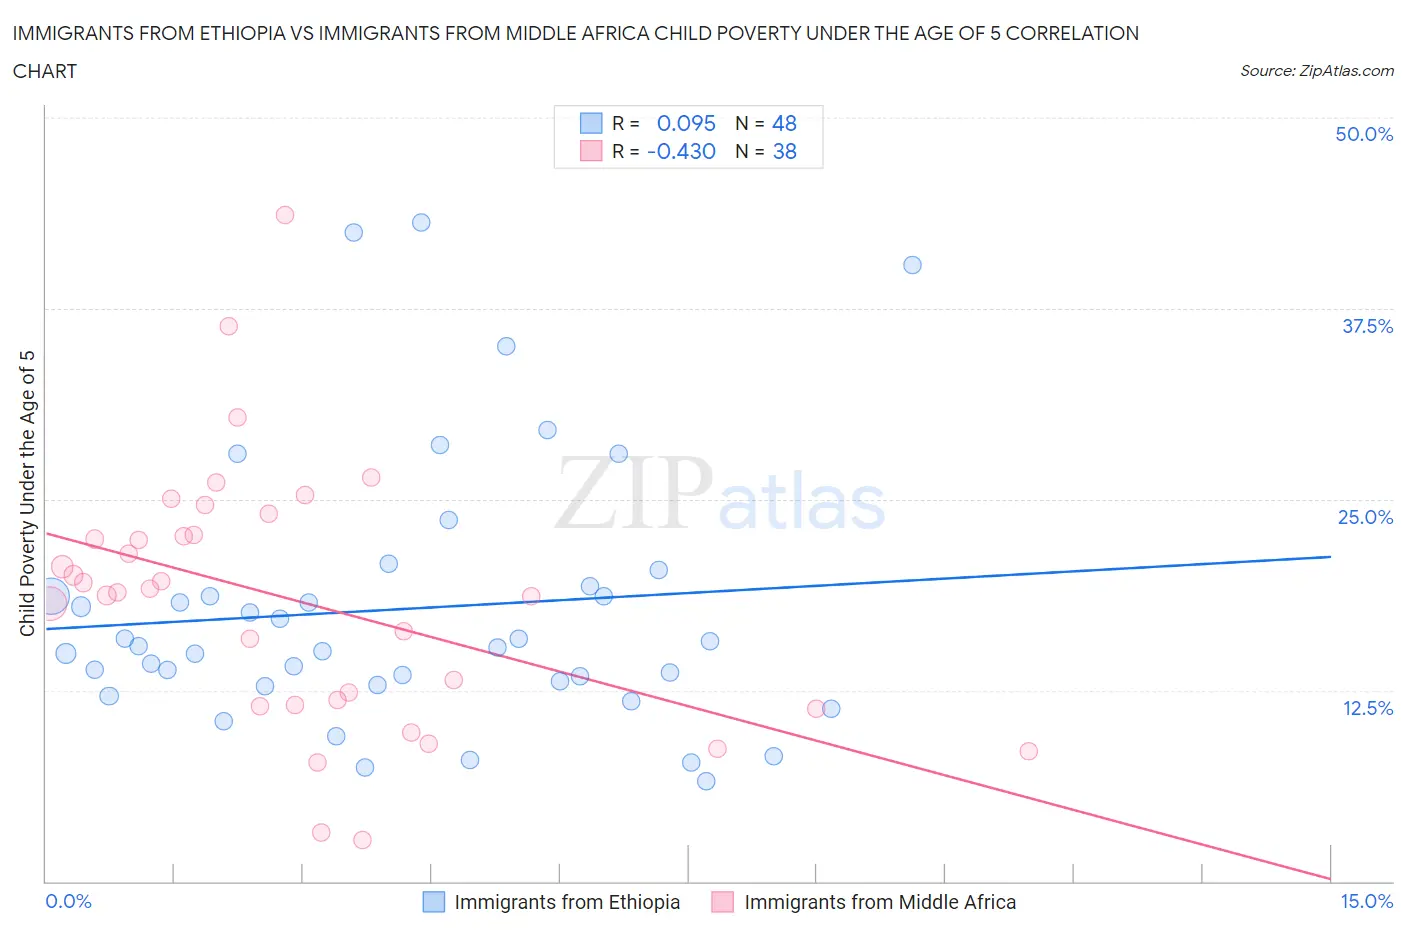 Immigrants from Ethiopia vs Immigrants from Middle Africa Child Poverty Under the Age of 5